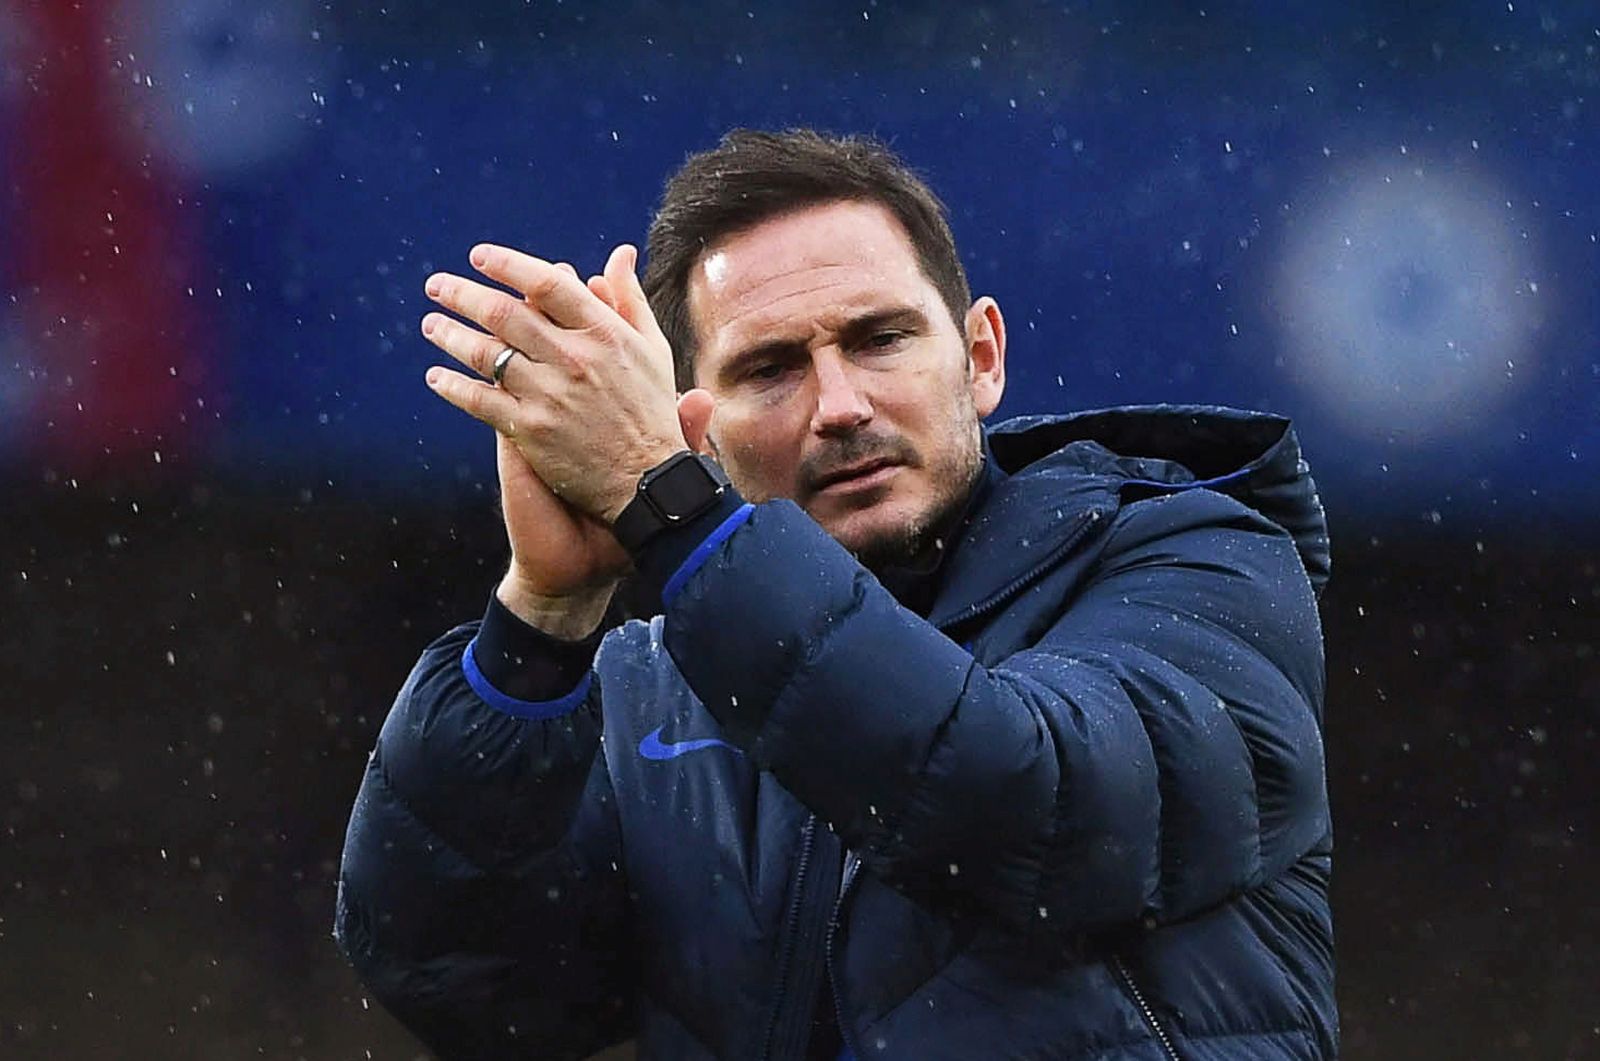 epa08963883 (FILE) -  Chelsea's manager Frank Lampard applauds fans during the English Premier League soccer match between Chelsea FC and Crystal Palace at Stamford Bridge in London, Britain, 09 November 2019 (reissued on 25 January 2021). On 25 January 2021 Chelsea announced the decision to sack Frank Lampard, who was appointed as manager on 04 July 2019.  EPA/NEIL HALL EDITORIAL USE ONLY. No use with unauthorized audio, video, data, fixture lists, club/league logos or 'live' services. Online in-match use limited to 120 images, no video emulation. No use in betting, games or single club/league/player publications *** Local Caption *** 55613482